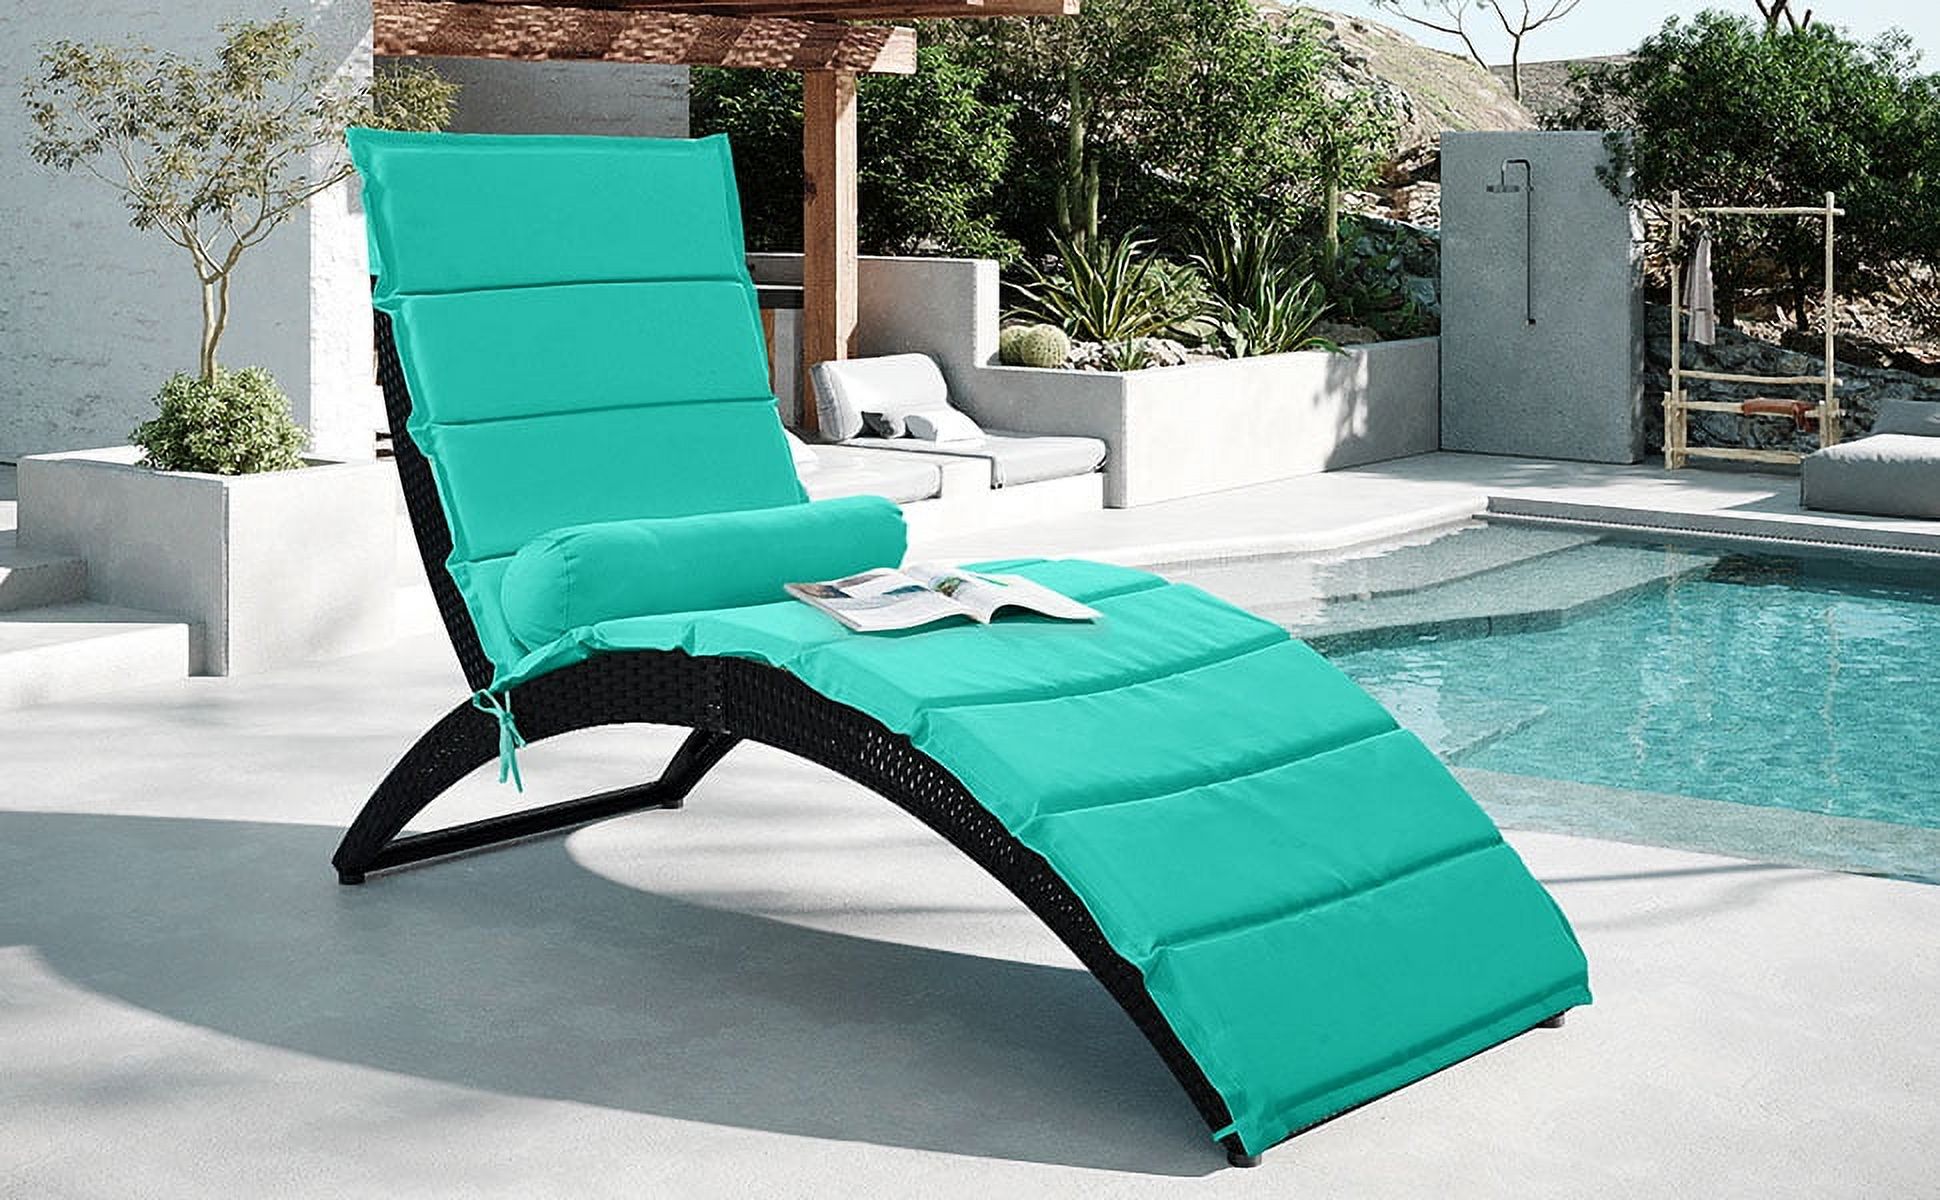 Patio Chaise Lounge, Reclining Camping Chair, PE Rattan Folding Sun Recliner Chair with Seat Cushion, Poolside Garden Outdoor Chaise Lounge Chairs, JA1096 - image 2 of 8